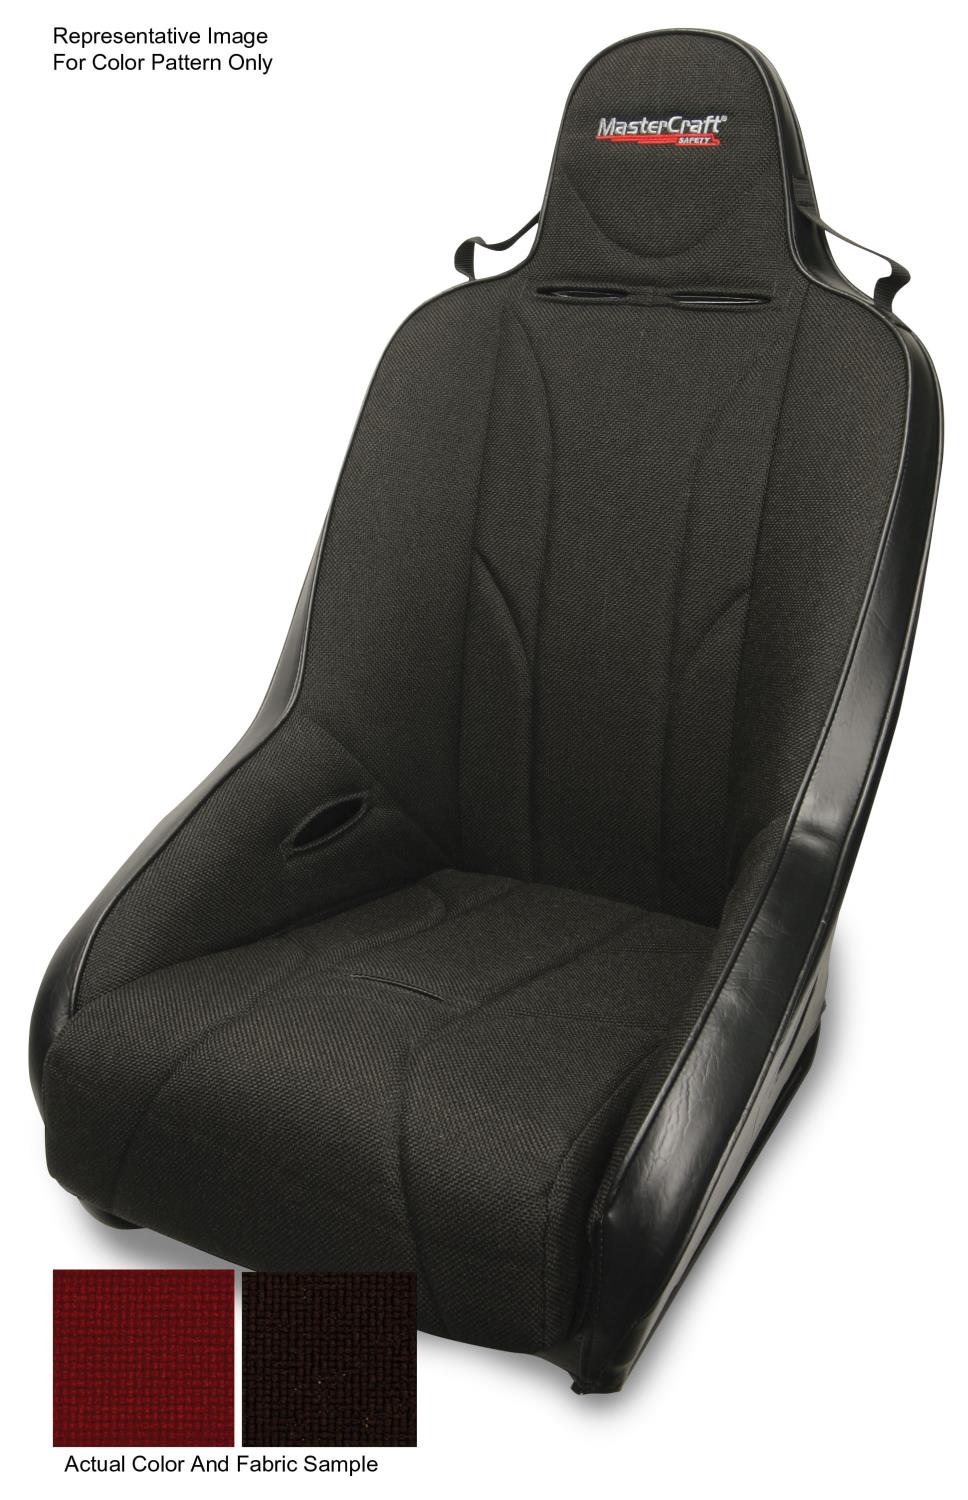 561212 2 in. WIDER PROSeat w/Fixed Headrest, Black with Black Fabric Removable Cushion, Red Side Panels, Black Band